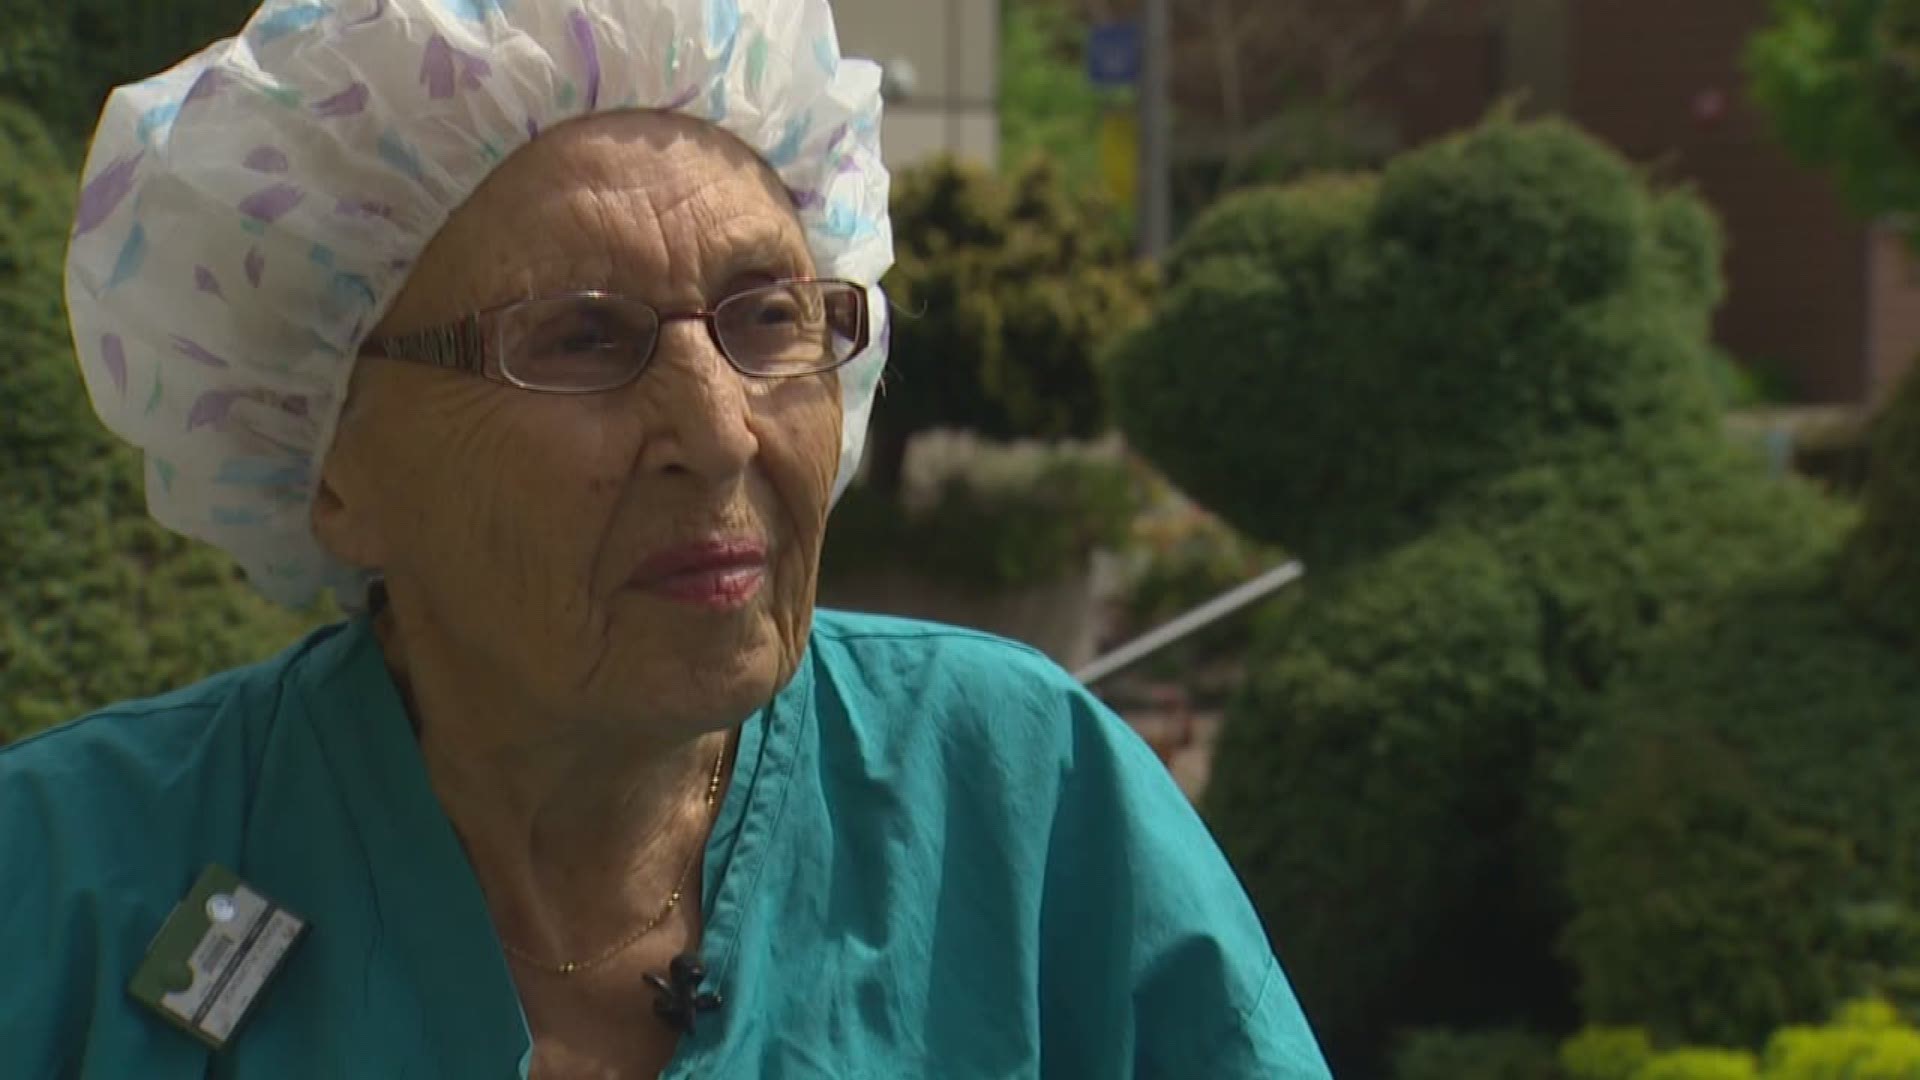 The oldest nurse in the country is turning 92 years old at Tacoma General Hospital. She's been on the job for more than 70 years.